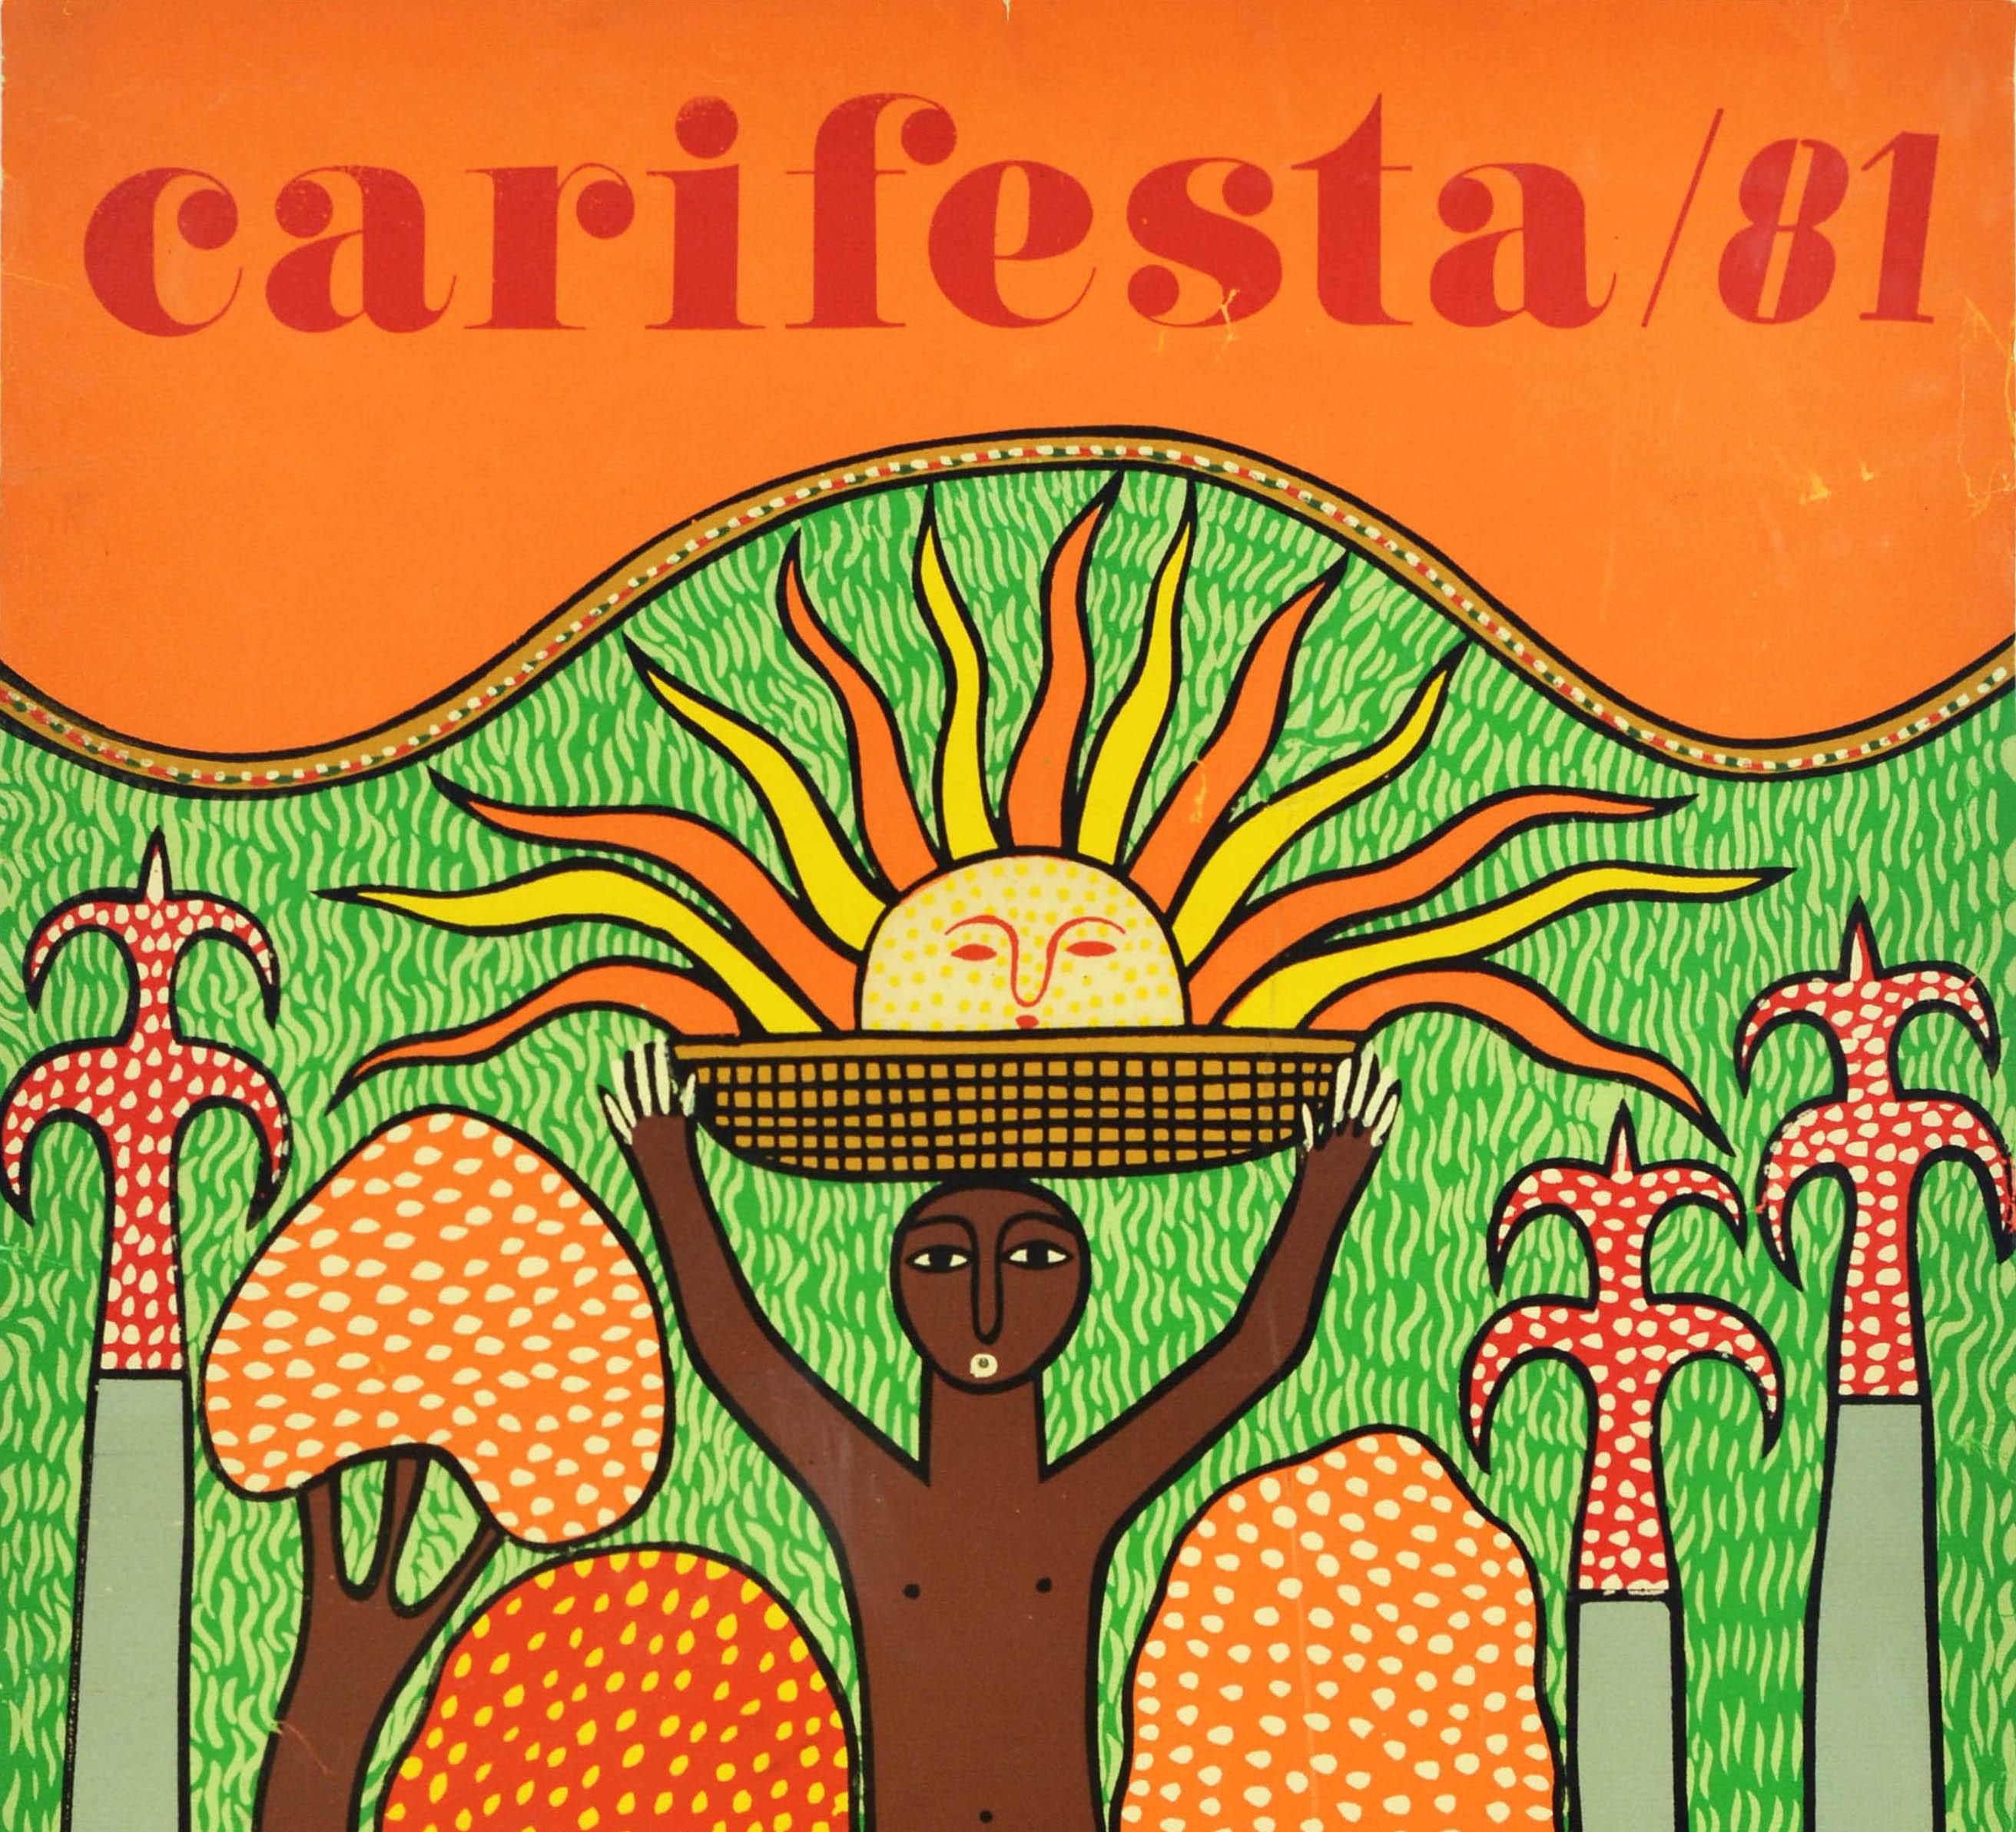 Original vintage screen printed poster for the Carifesta 81 Barbados Cuba featuring a colourful design depicting a person standing between trees holding a basket on his head with the rays from the sun radiating out of it against the green hill in